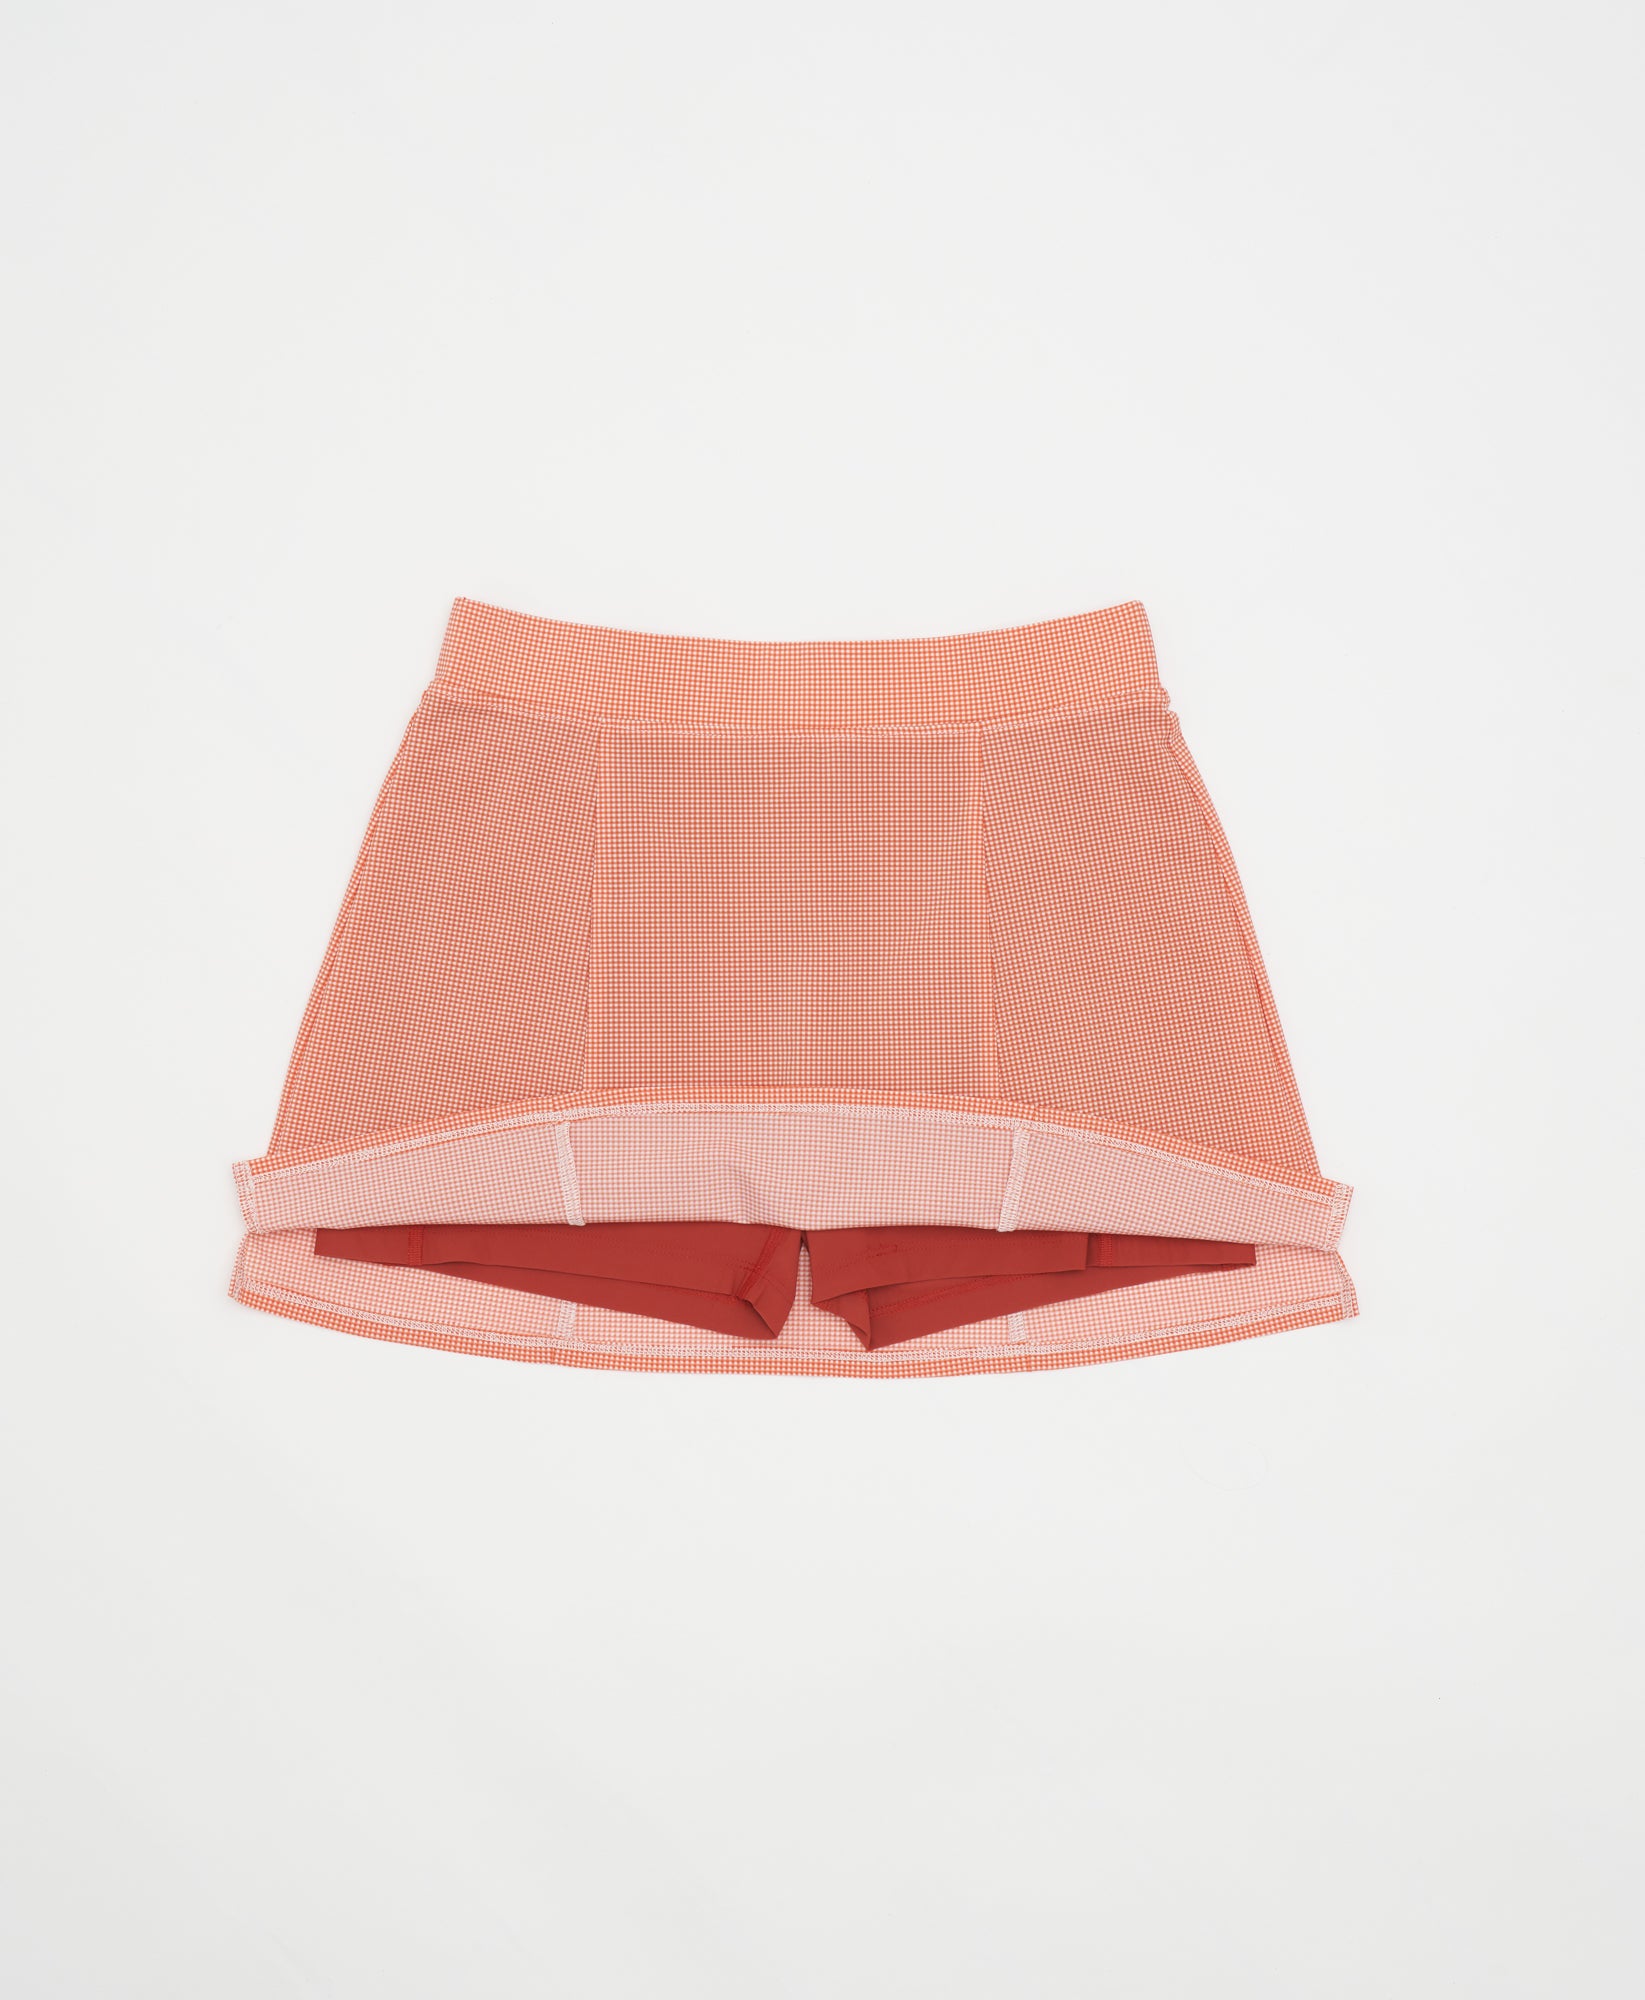 Wear One's At Simple Skort in Clay Pink Flat Front